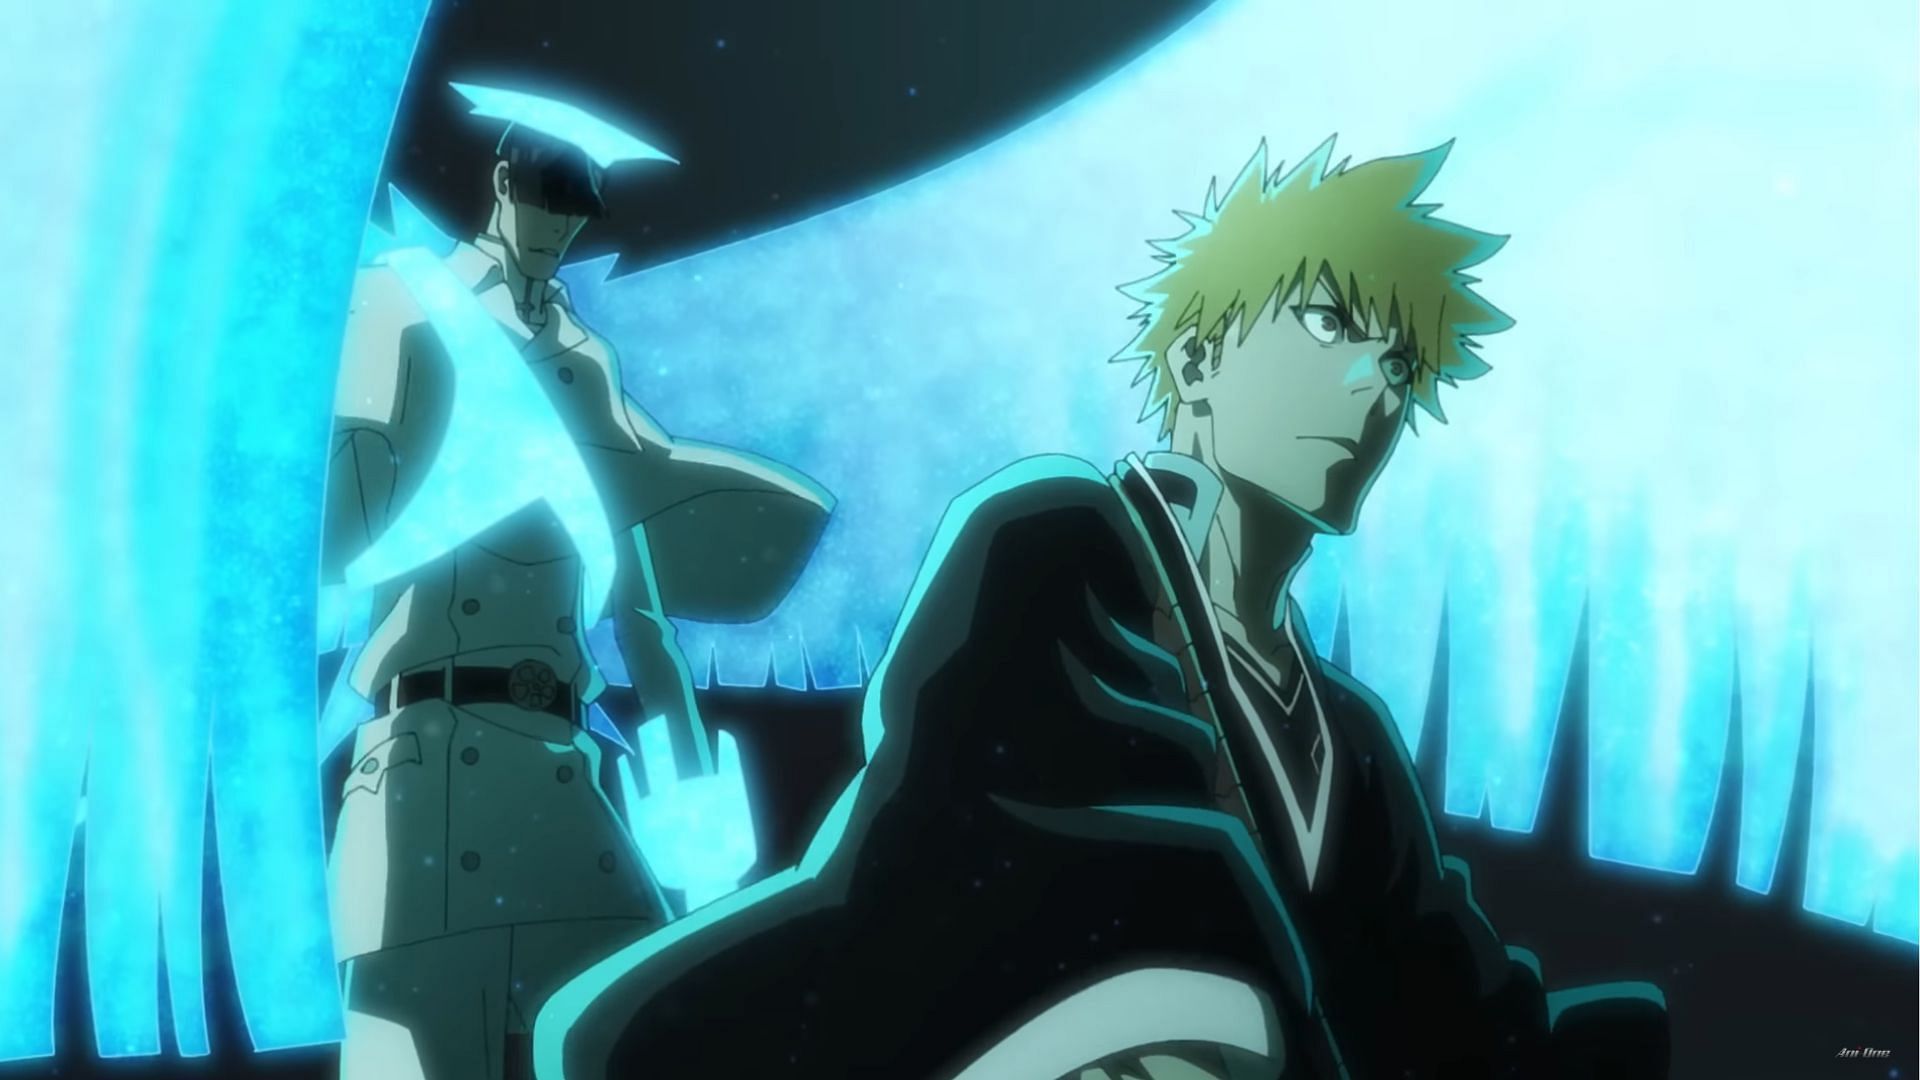 Bleach: Thousand-Year Blood War episode 4: Release date and time